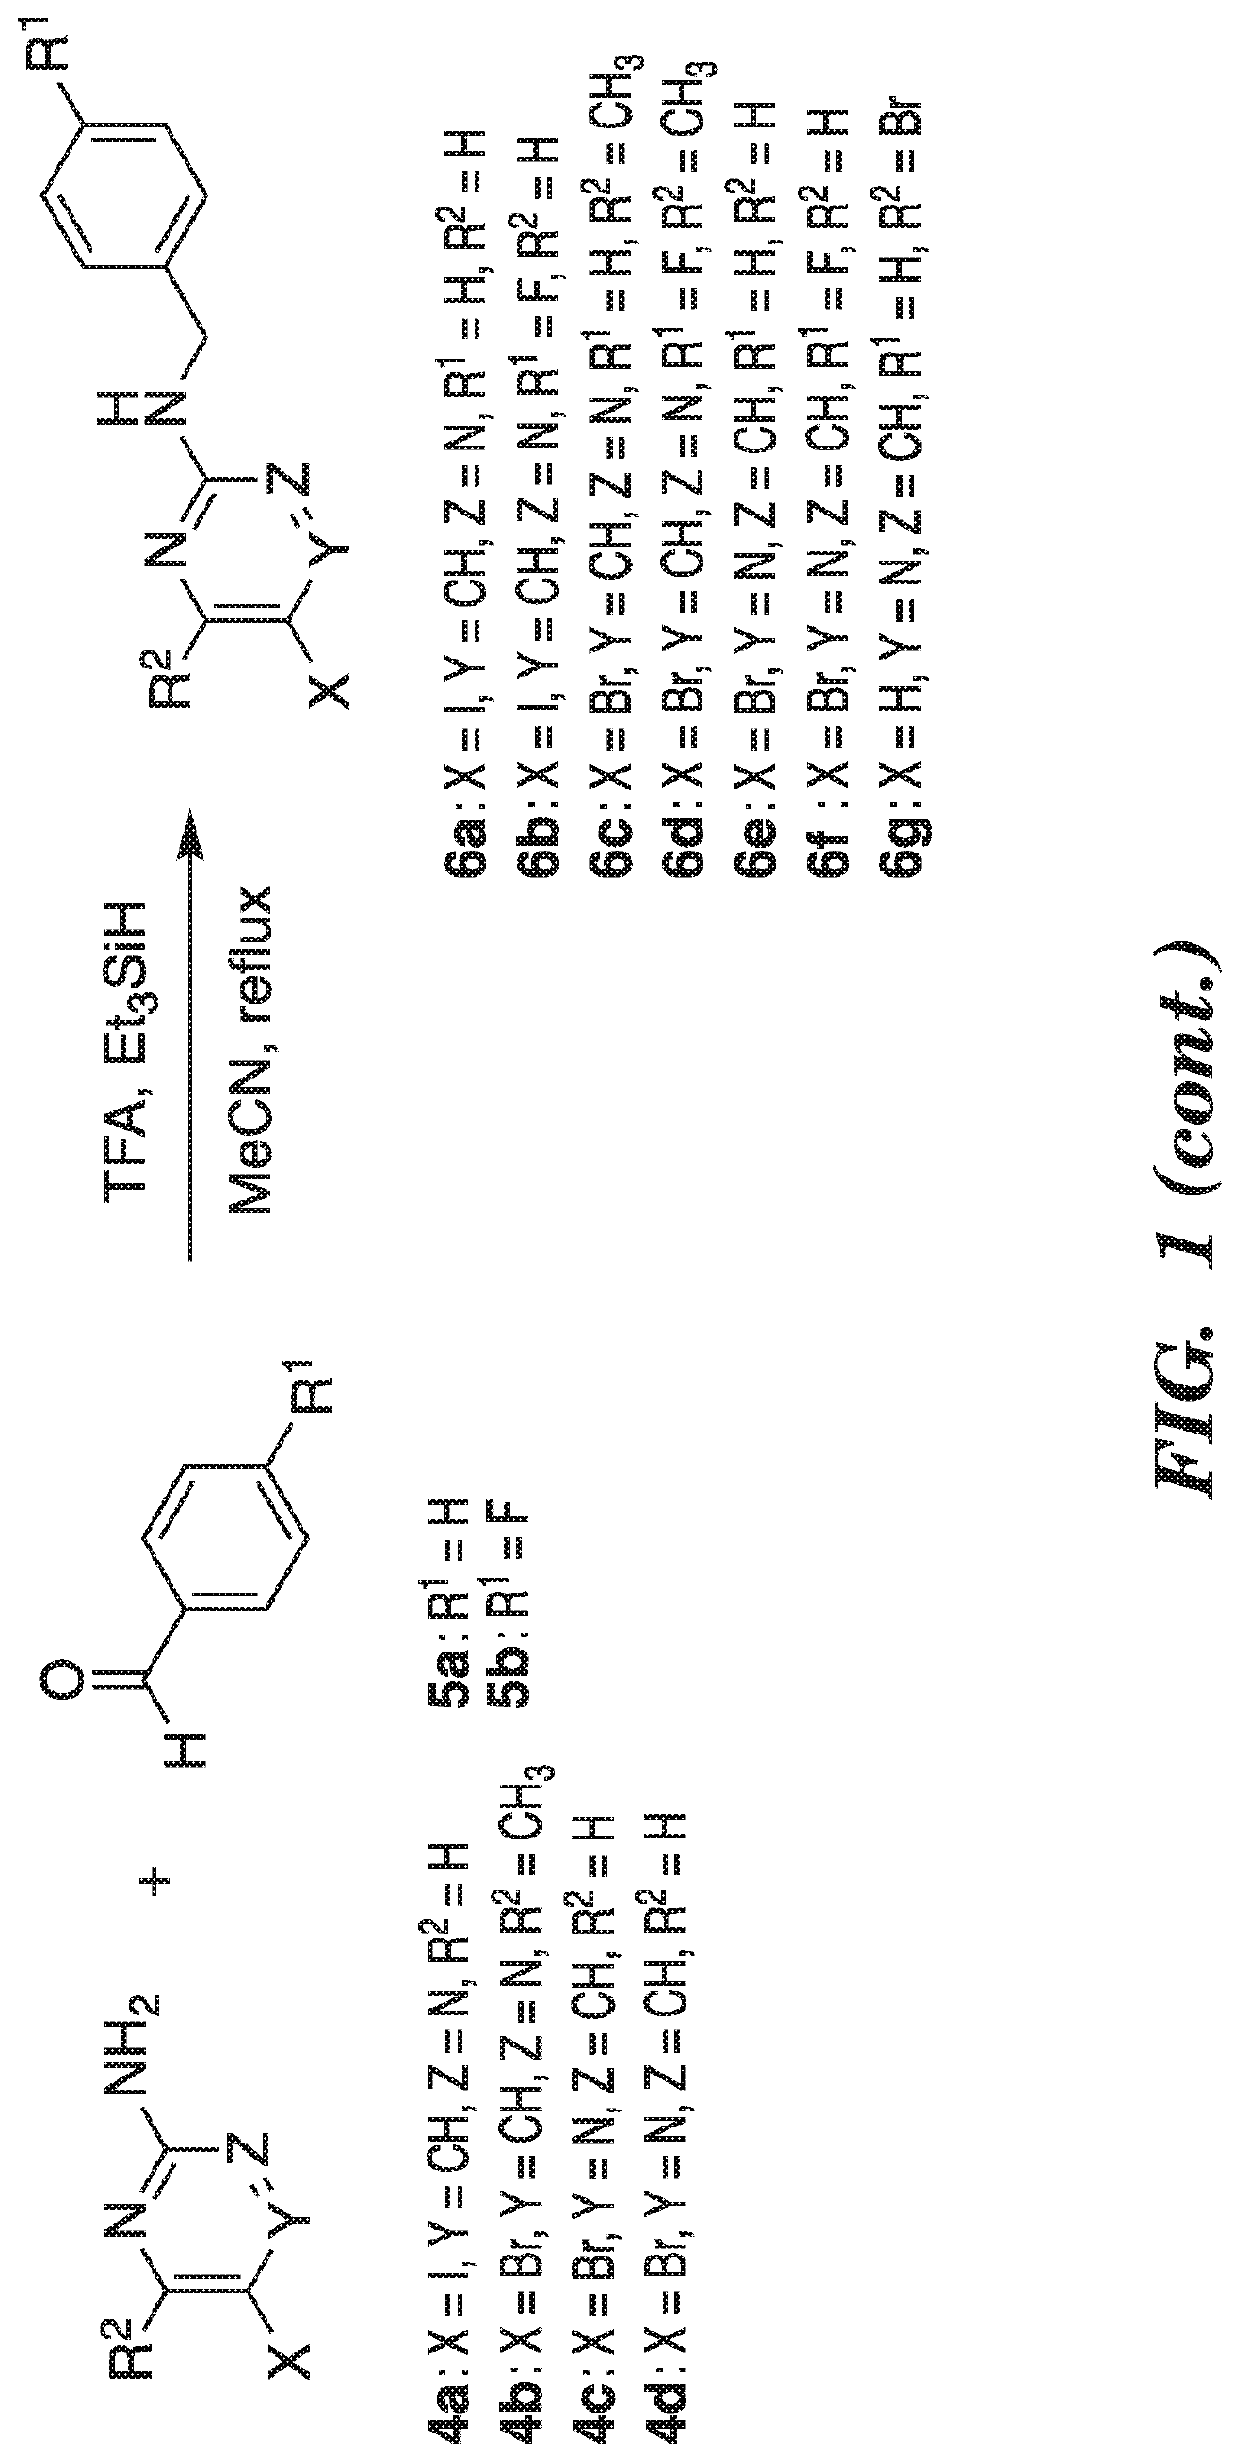 Kinase inhibitor compounds and compositions and methods of use